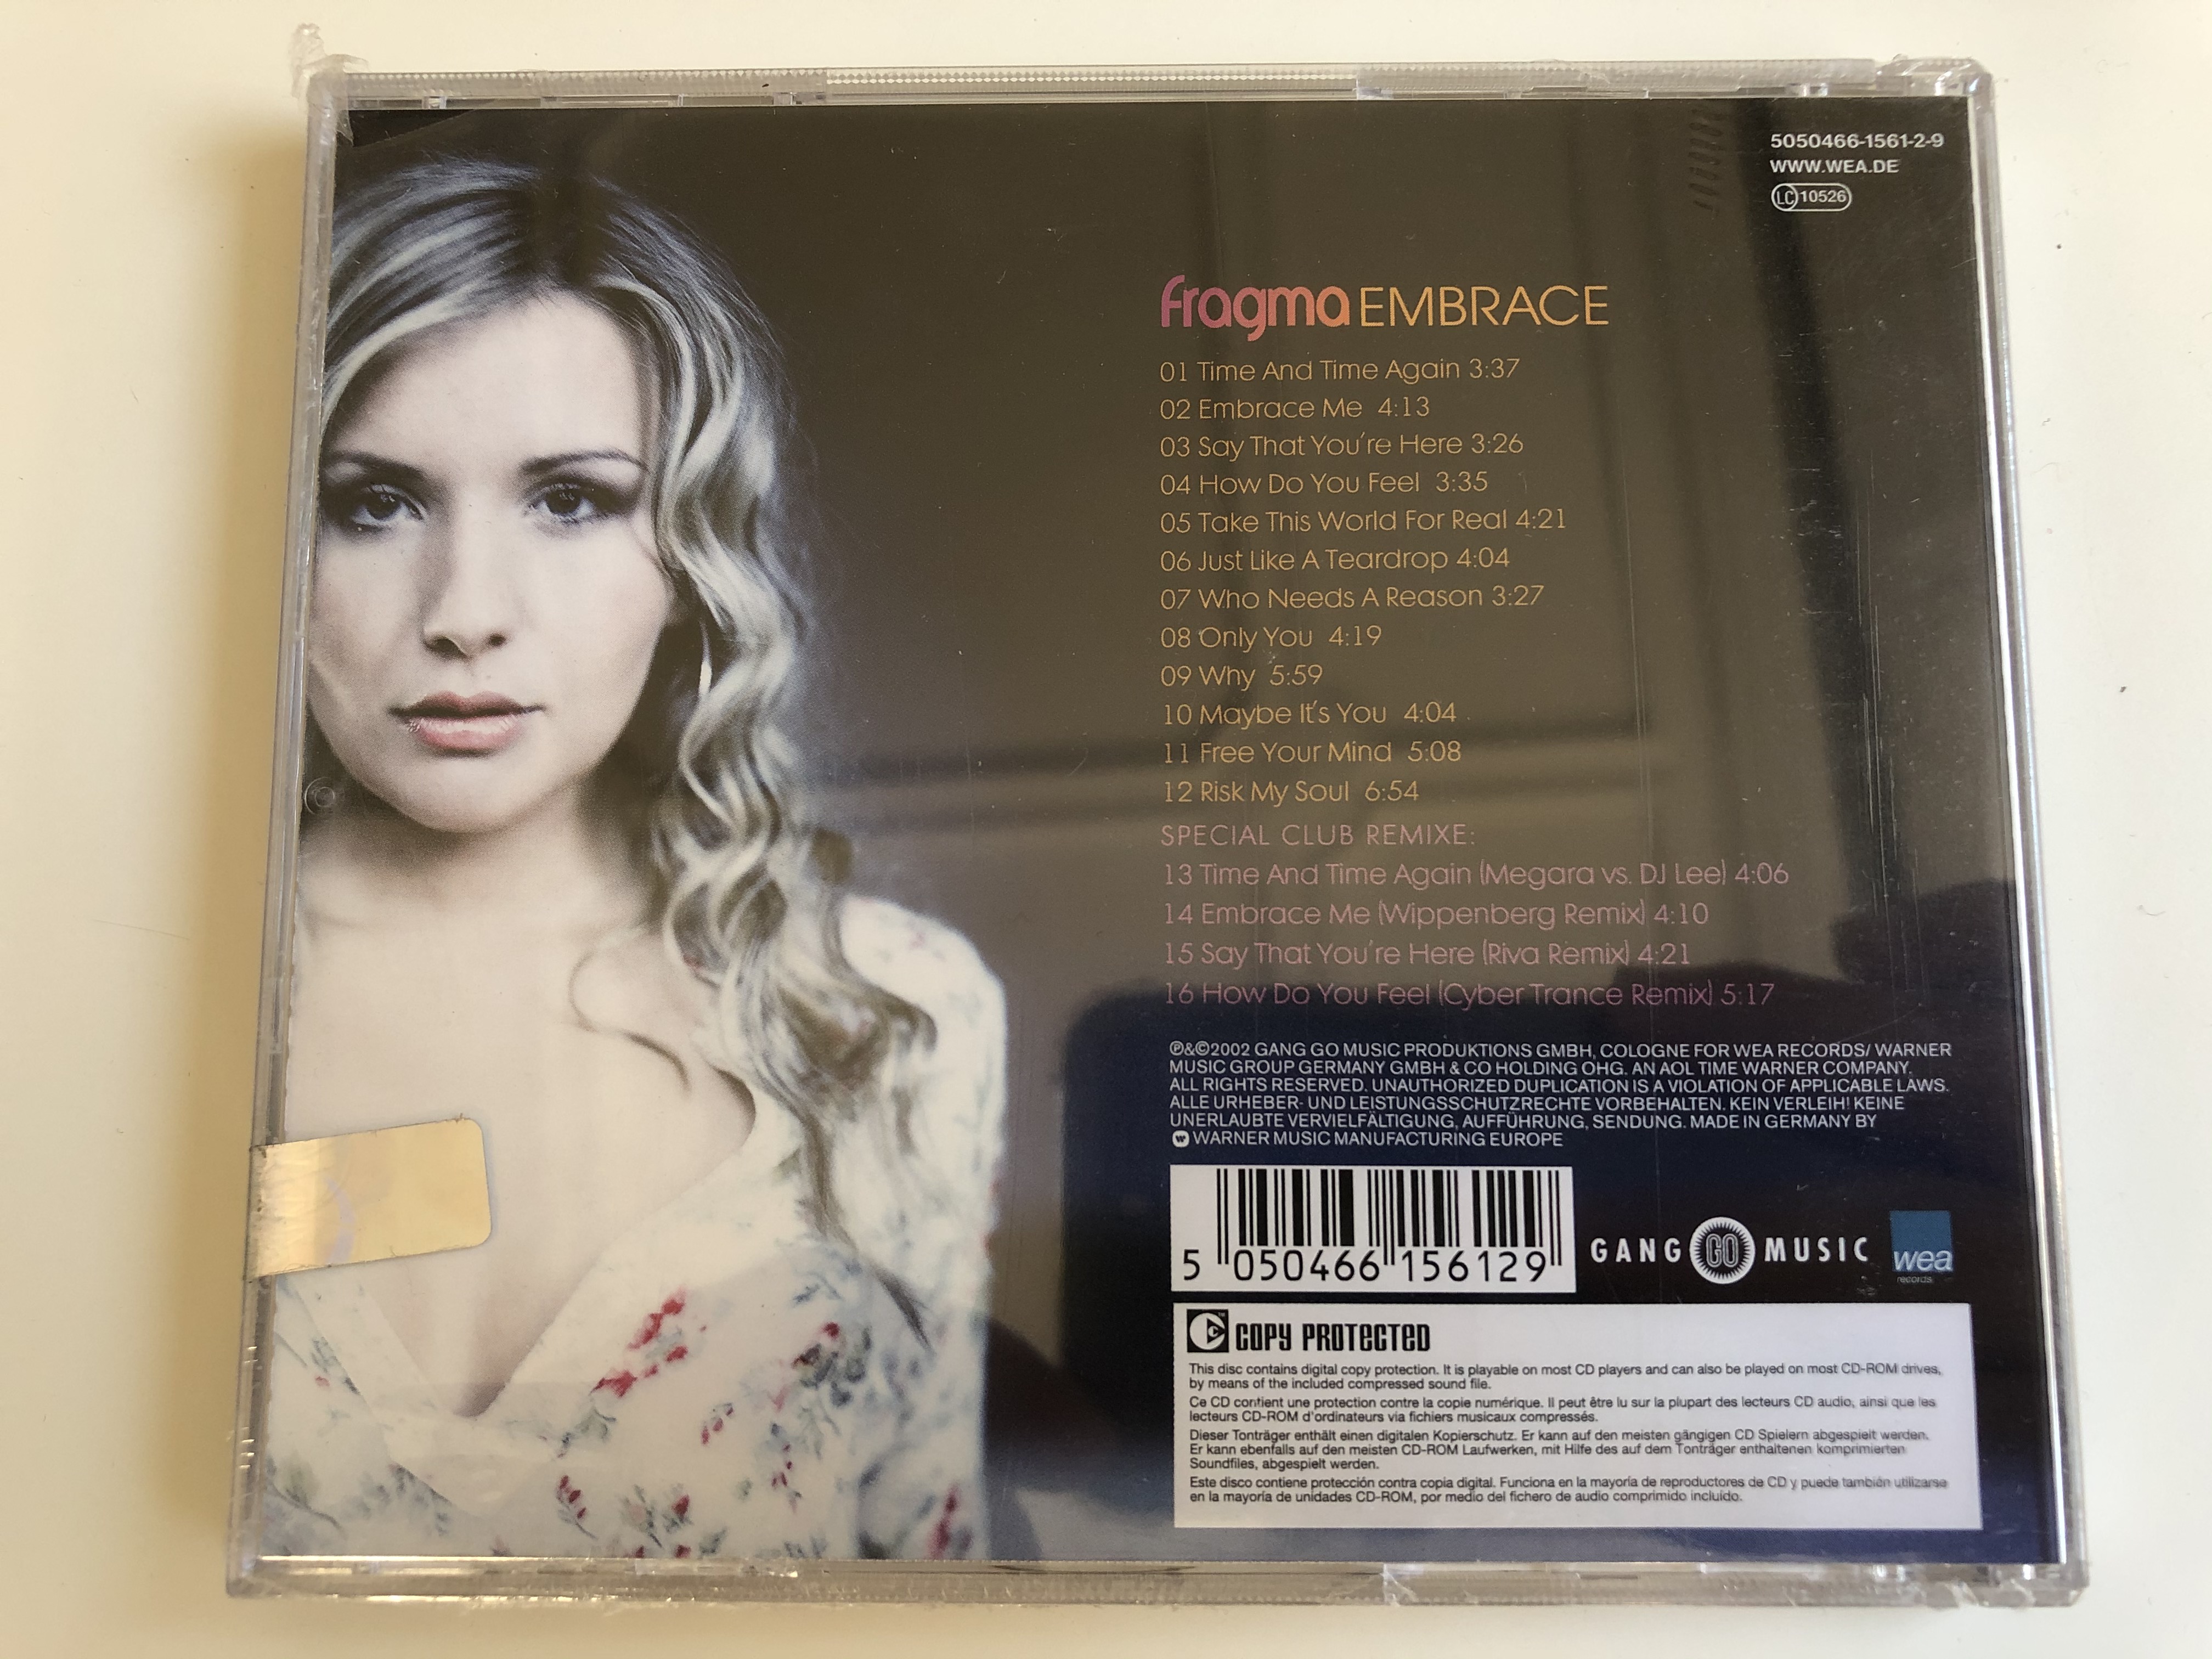 fragma-embrace-incl.-the-hitsingles-time-and-time-again-embrace-me-say-that-you-re-here-plus-special-remixes-gang-go-music-audio-cd-2002-5050466-1561-2-9-2-.jpg